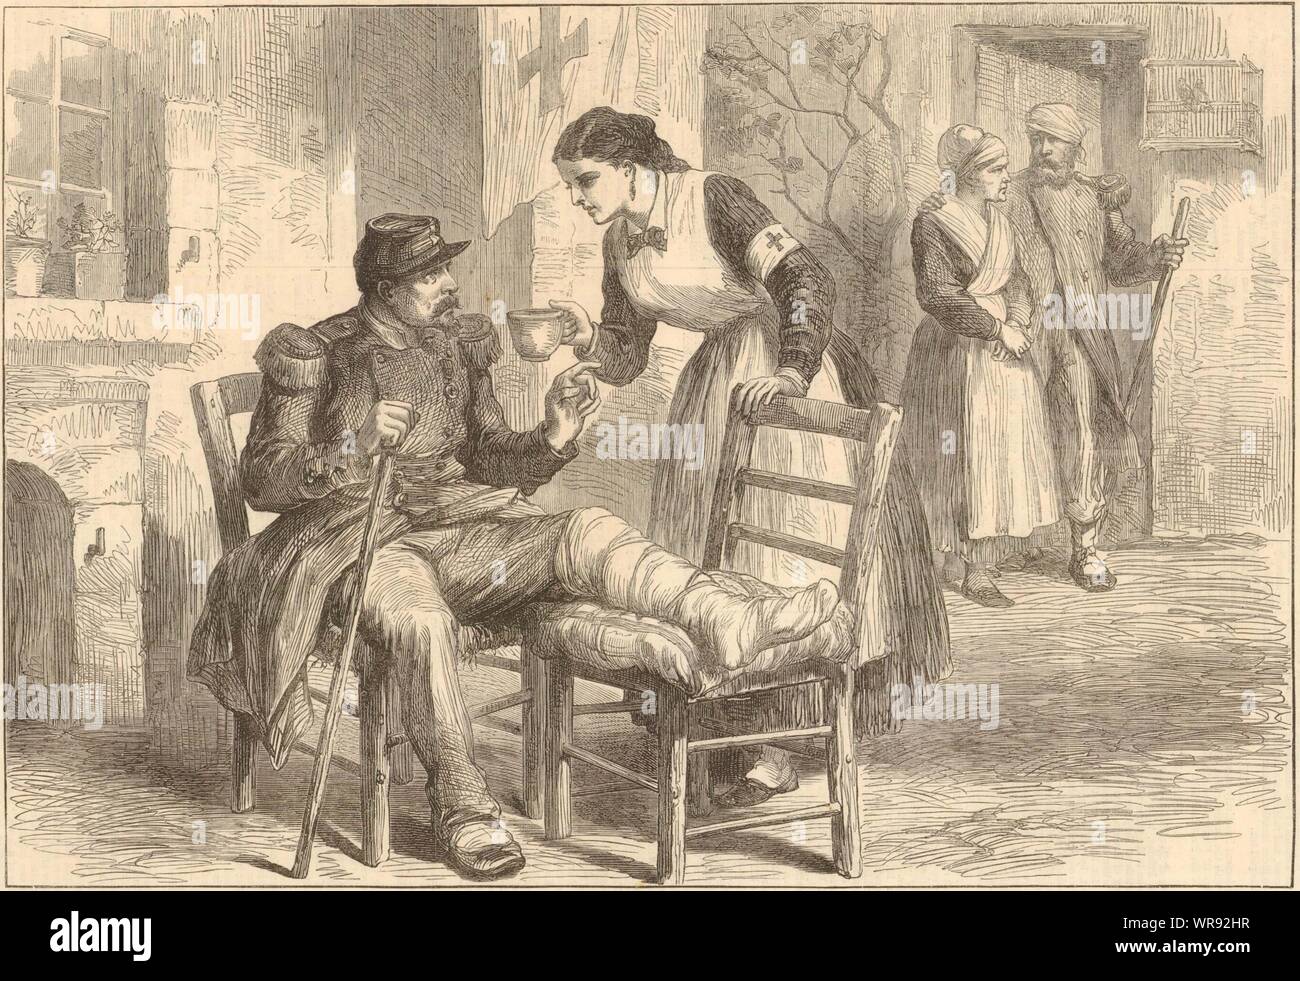 ' Cared For ', by L. Huard. Medical. Franco-Prussian War. France 1870 Stock Photo